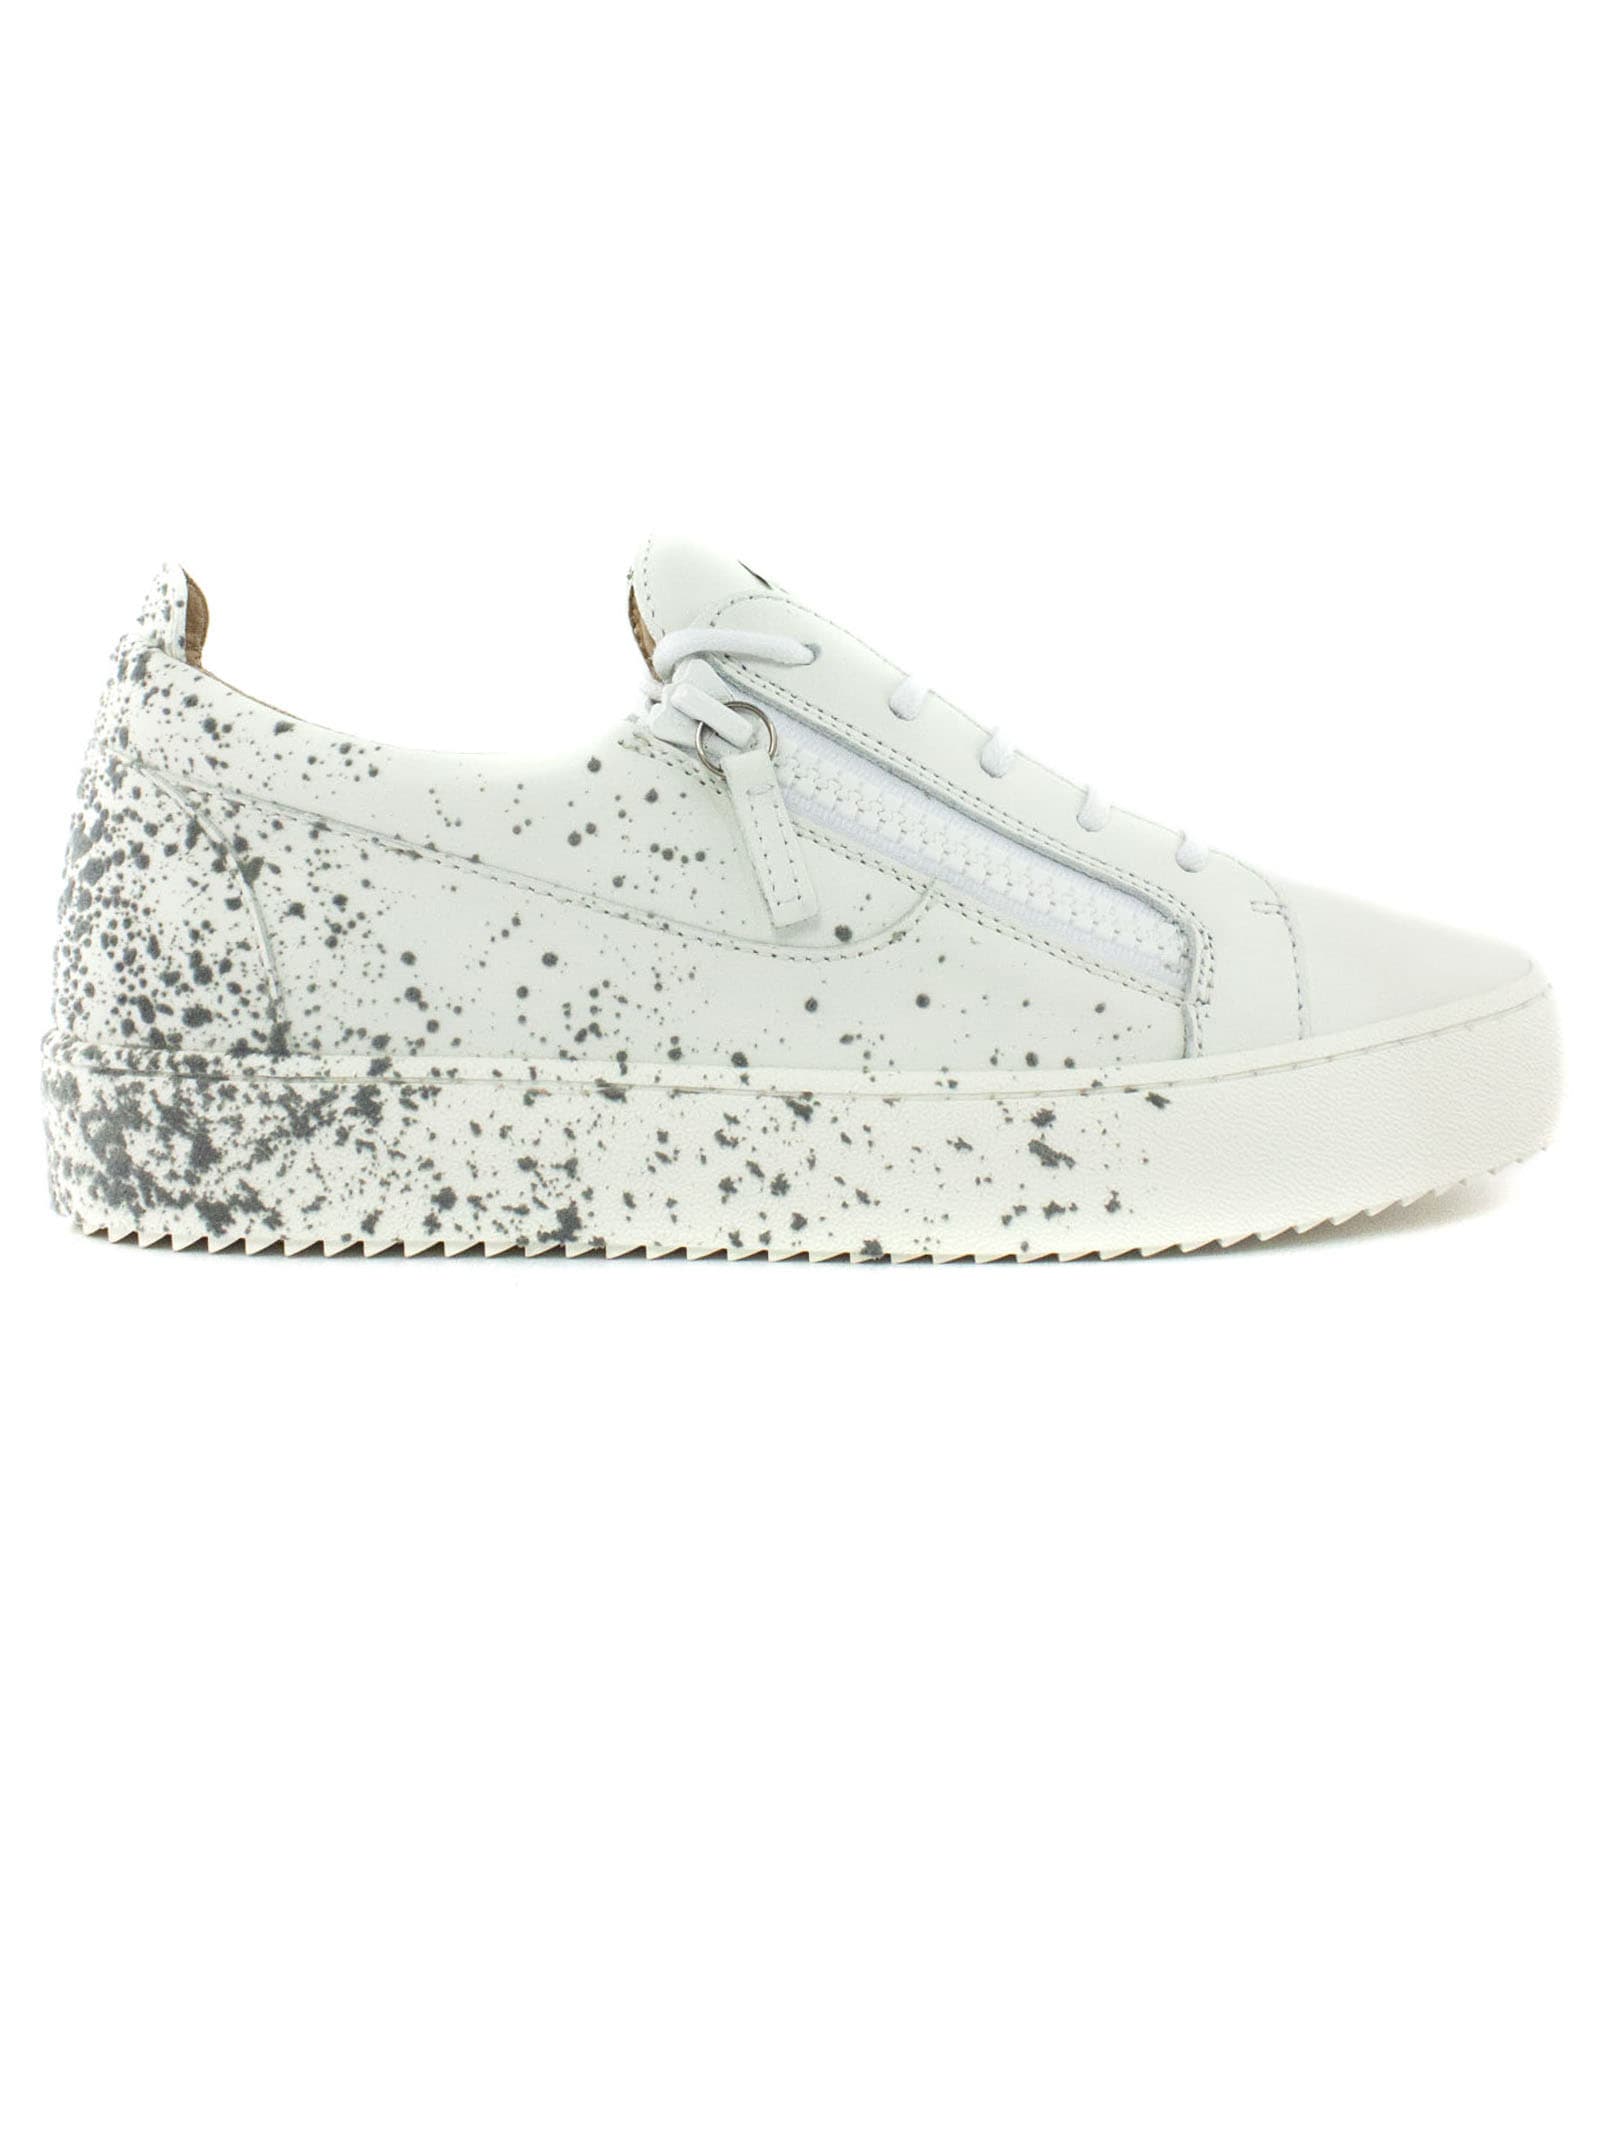 Giuseppe Zanotti White Leather Lace-up Sneakers